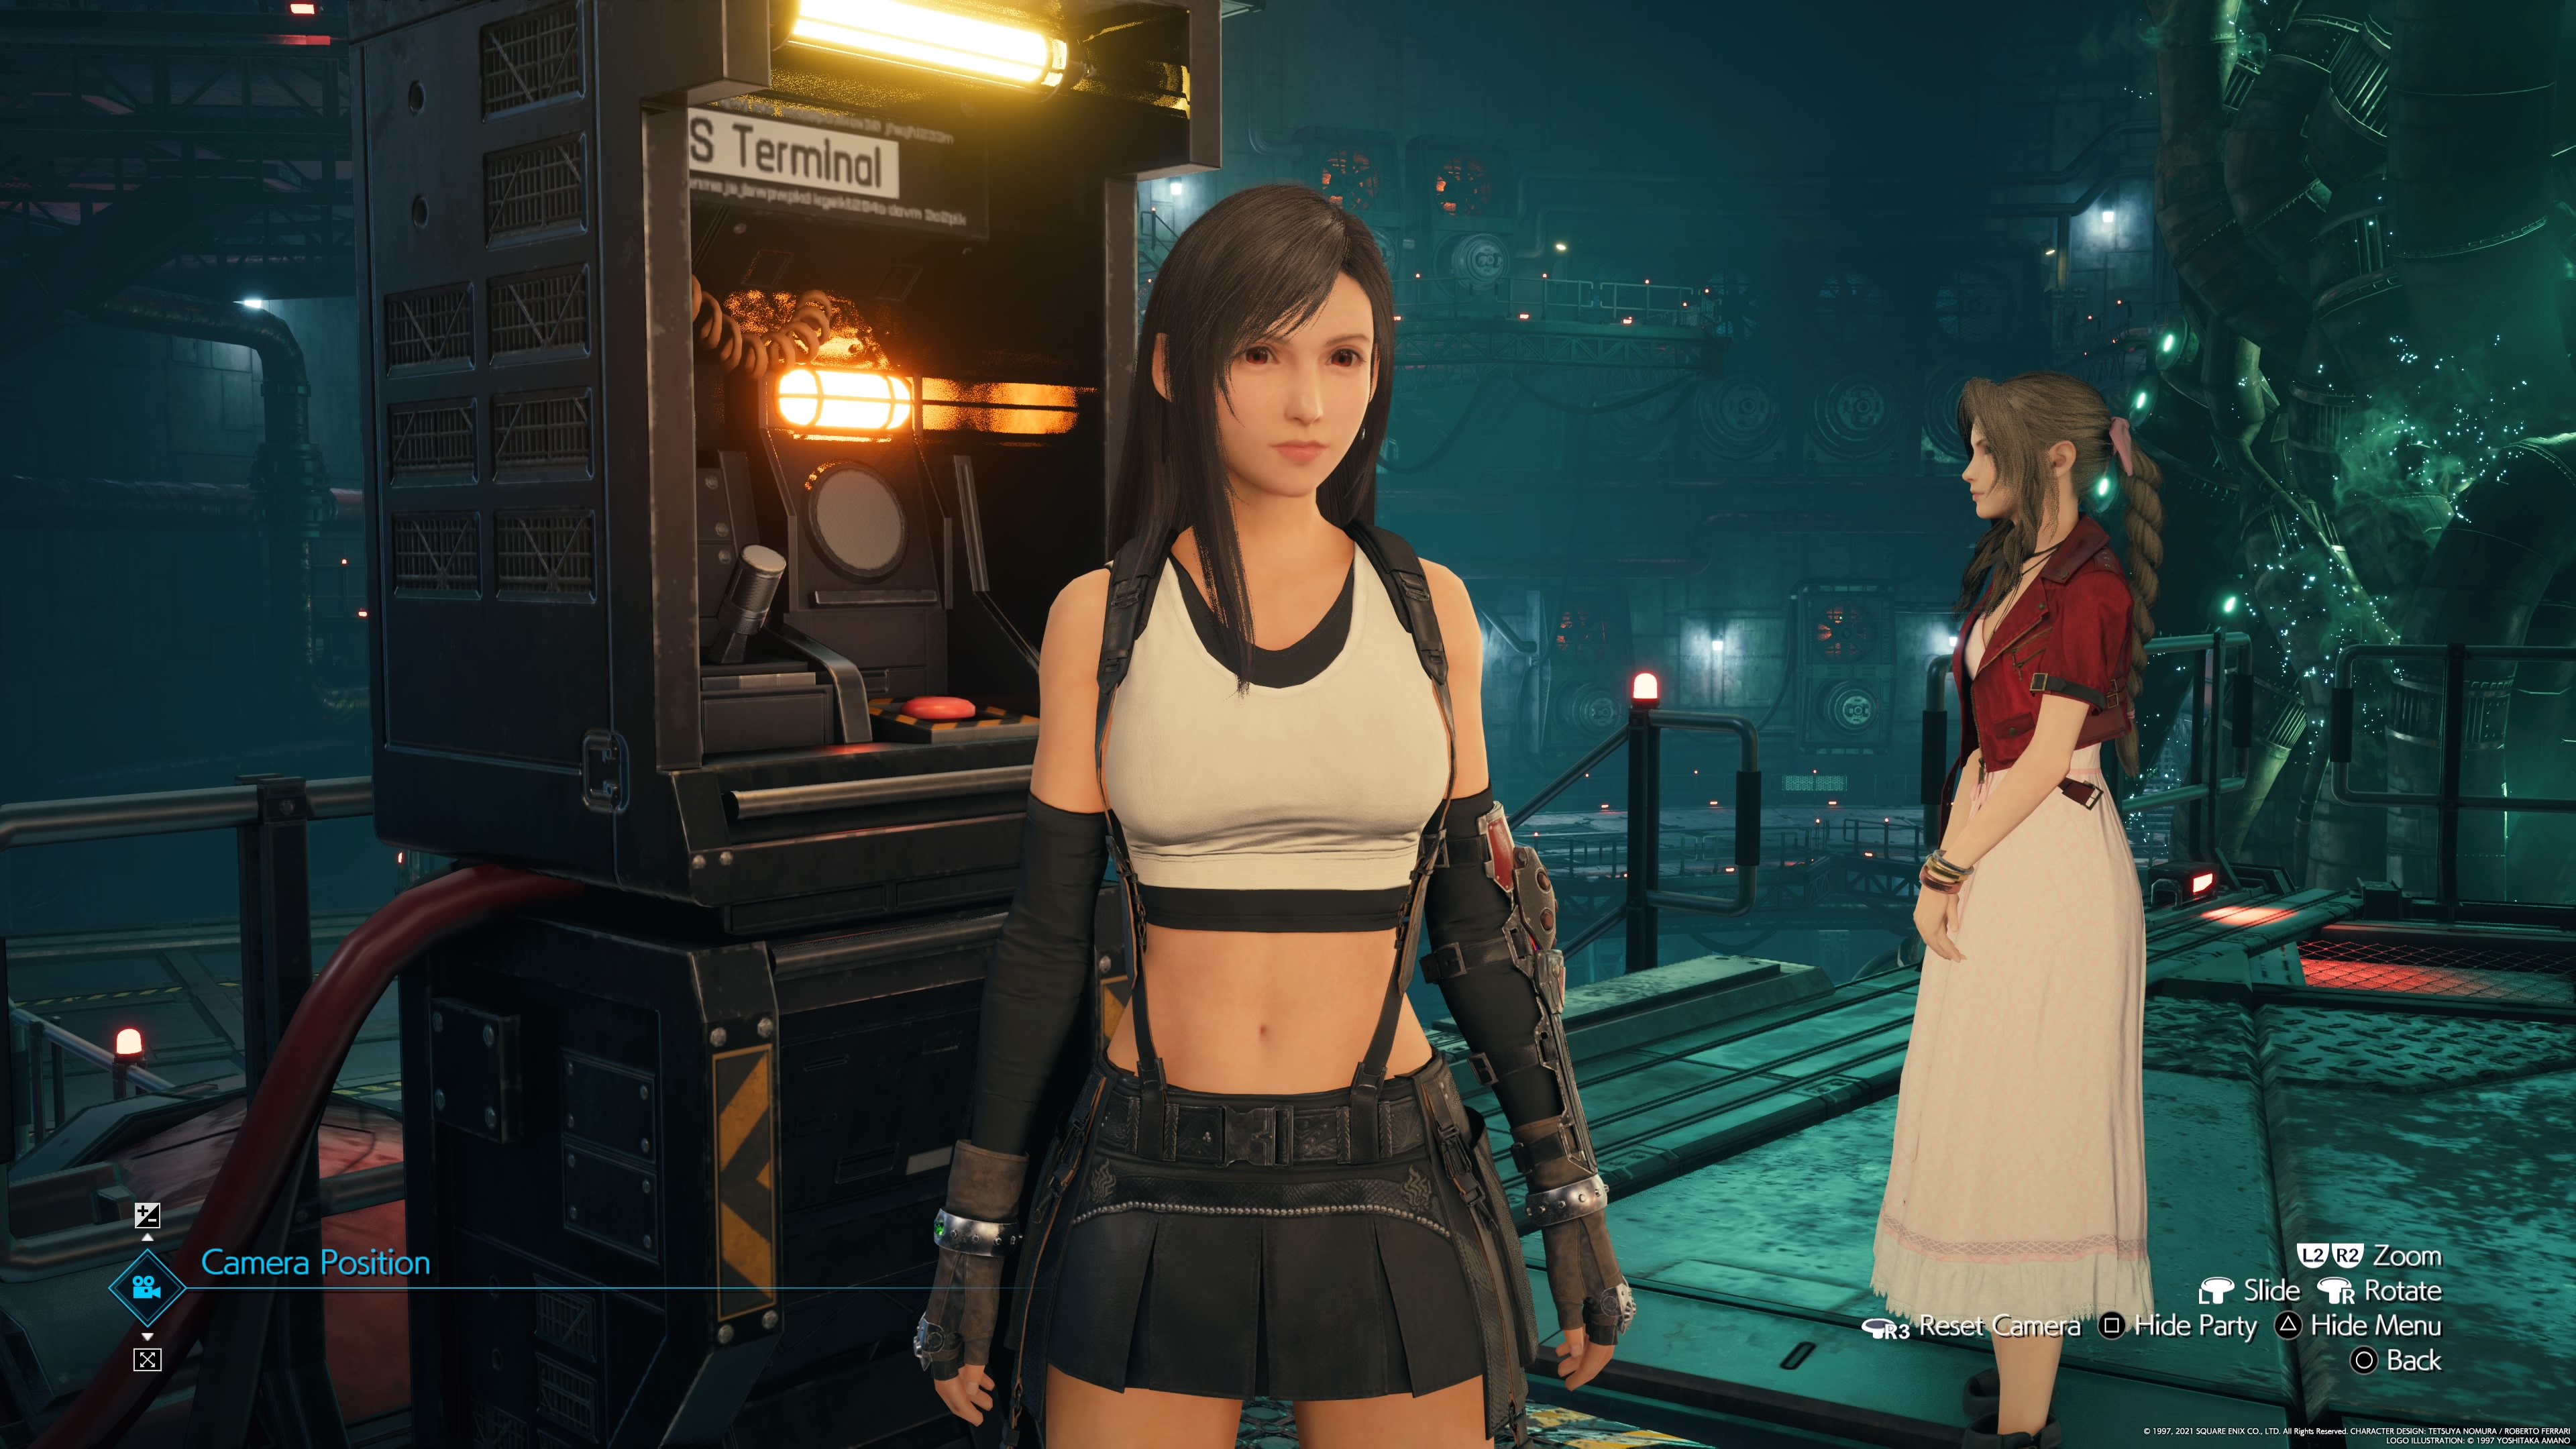 Final Fantasy VII Remake Preview - Fextralife